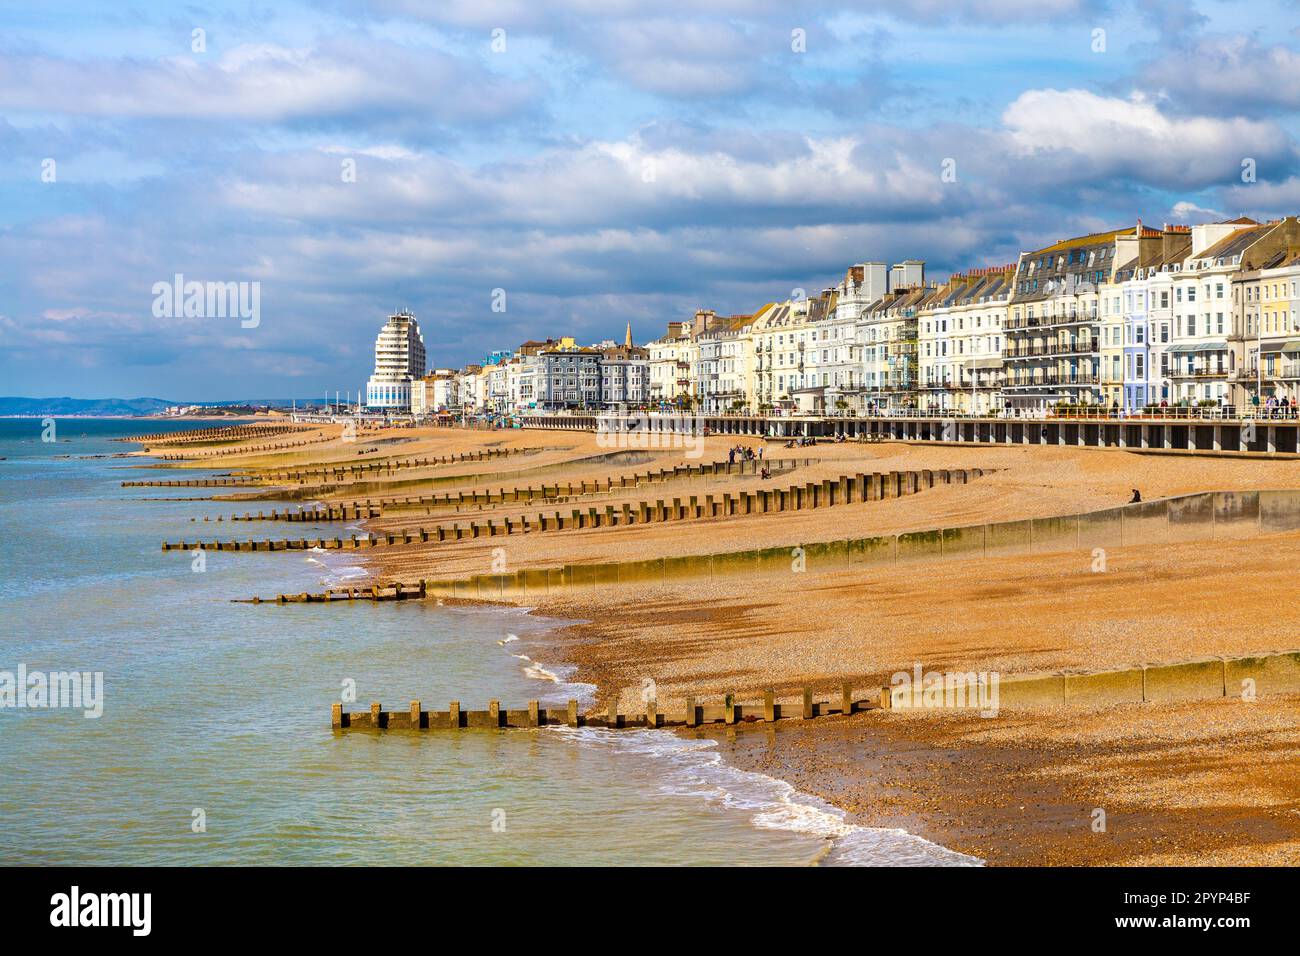 View of St. Leonards On Sea Beach from Hasings Pier, Hastings, East Sussex, UK Stock Photo